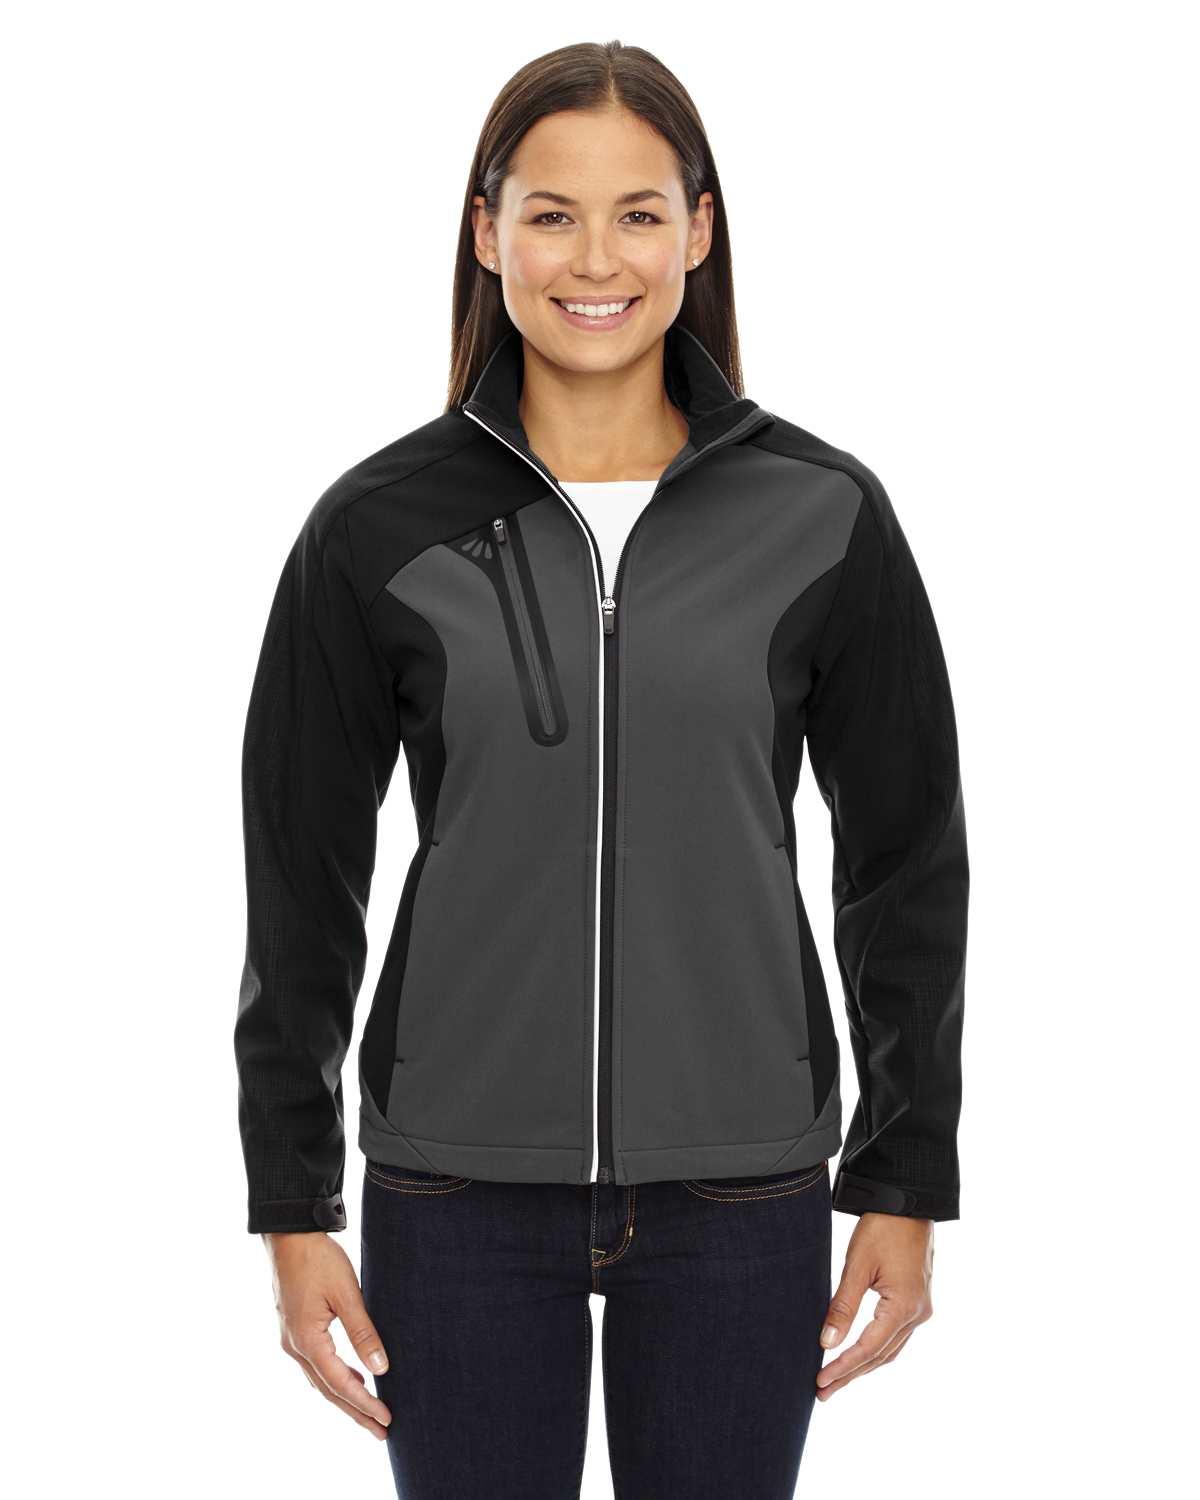 The Ash City - North End Ladies' Terrain Colorblock Soft Shell with Embossed Print - BLKSILK 866 - M - image 1 of 1